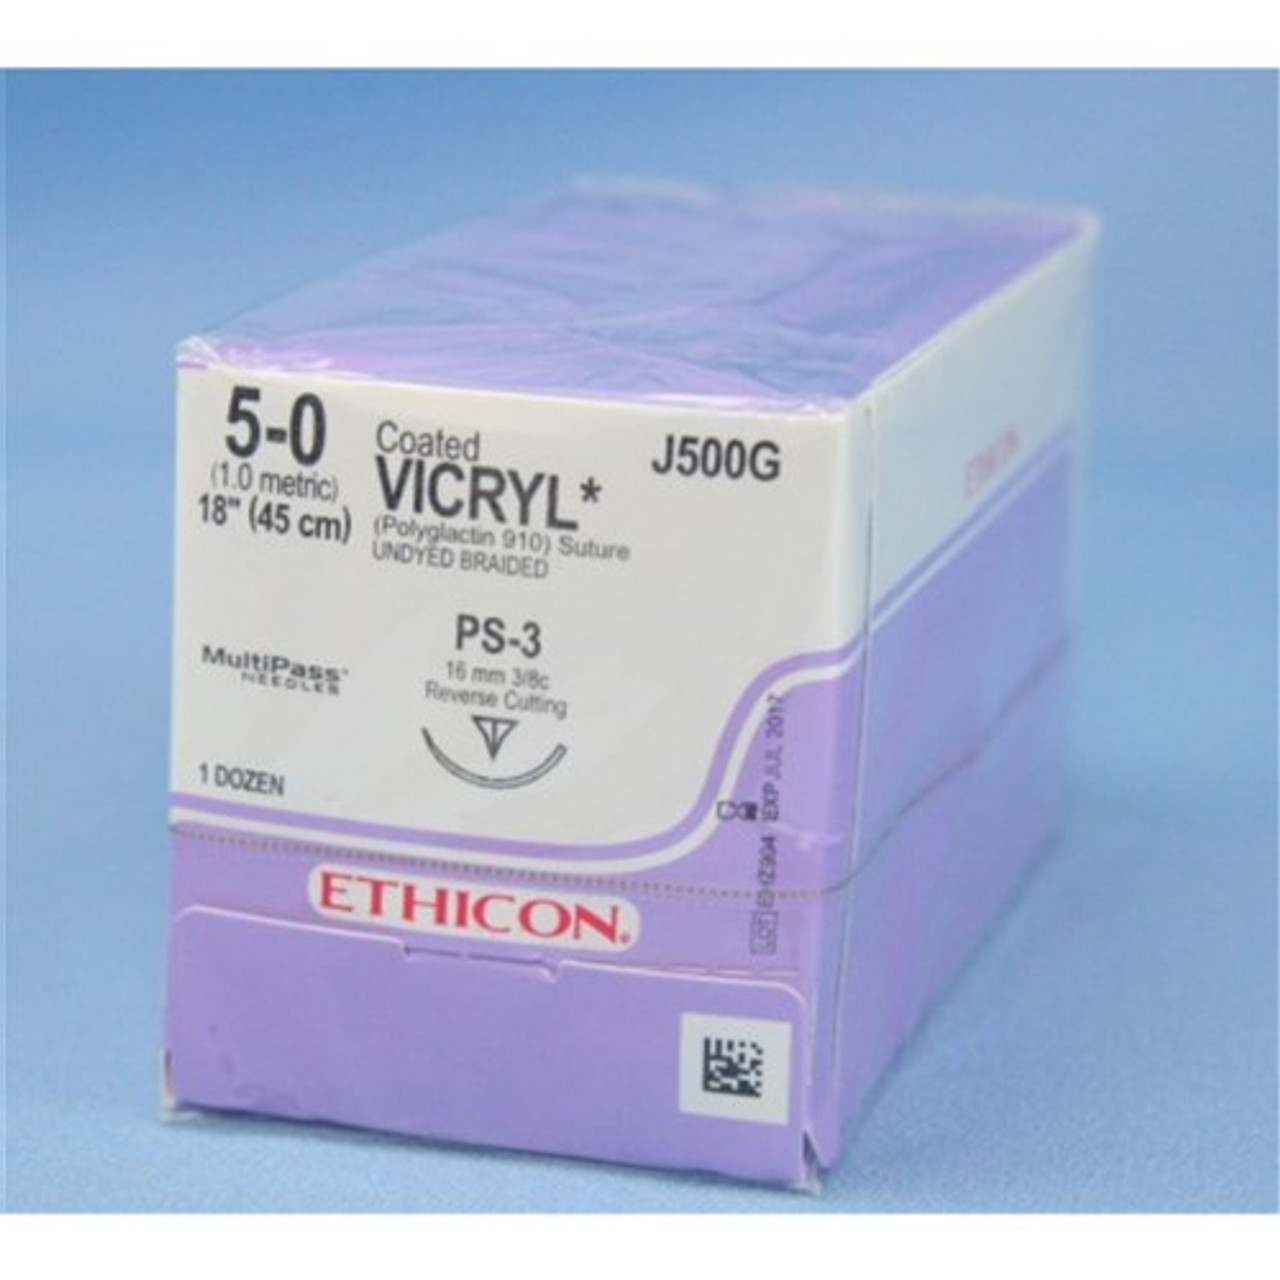 Ethicon-J500G SUTURE VICRYL CTD BRD UNDYE 5-0 18in PS-3 BX/12